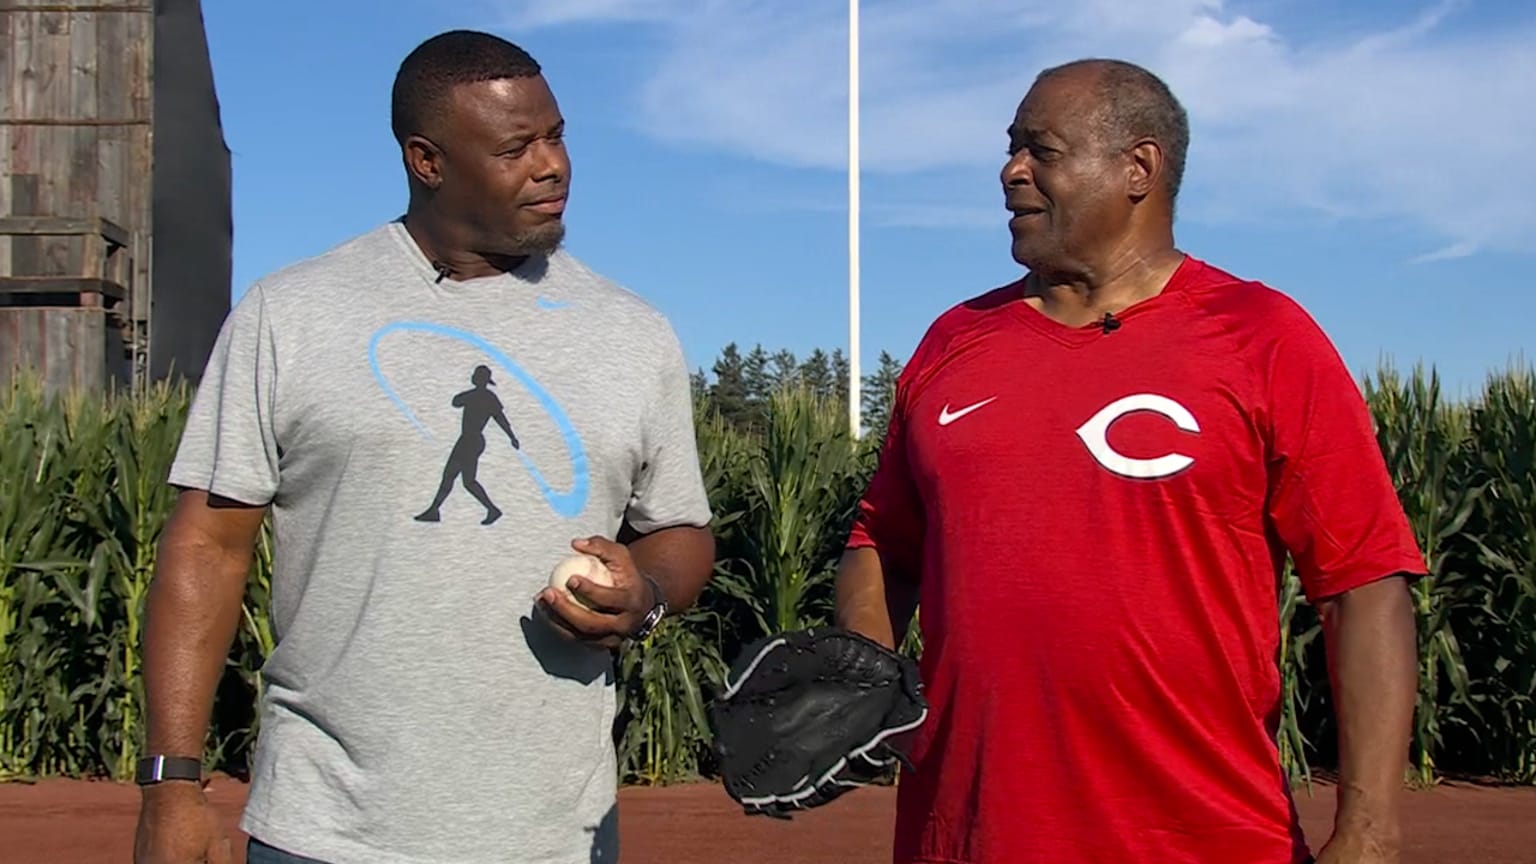 Ken Griffey Jr. in a gray T-shirt holds a baseball and looks at his dad, wearing a Reds T-shirt and holding a glove